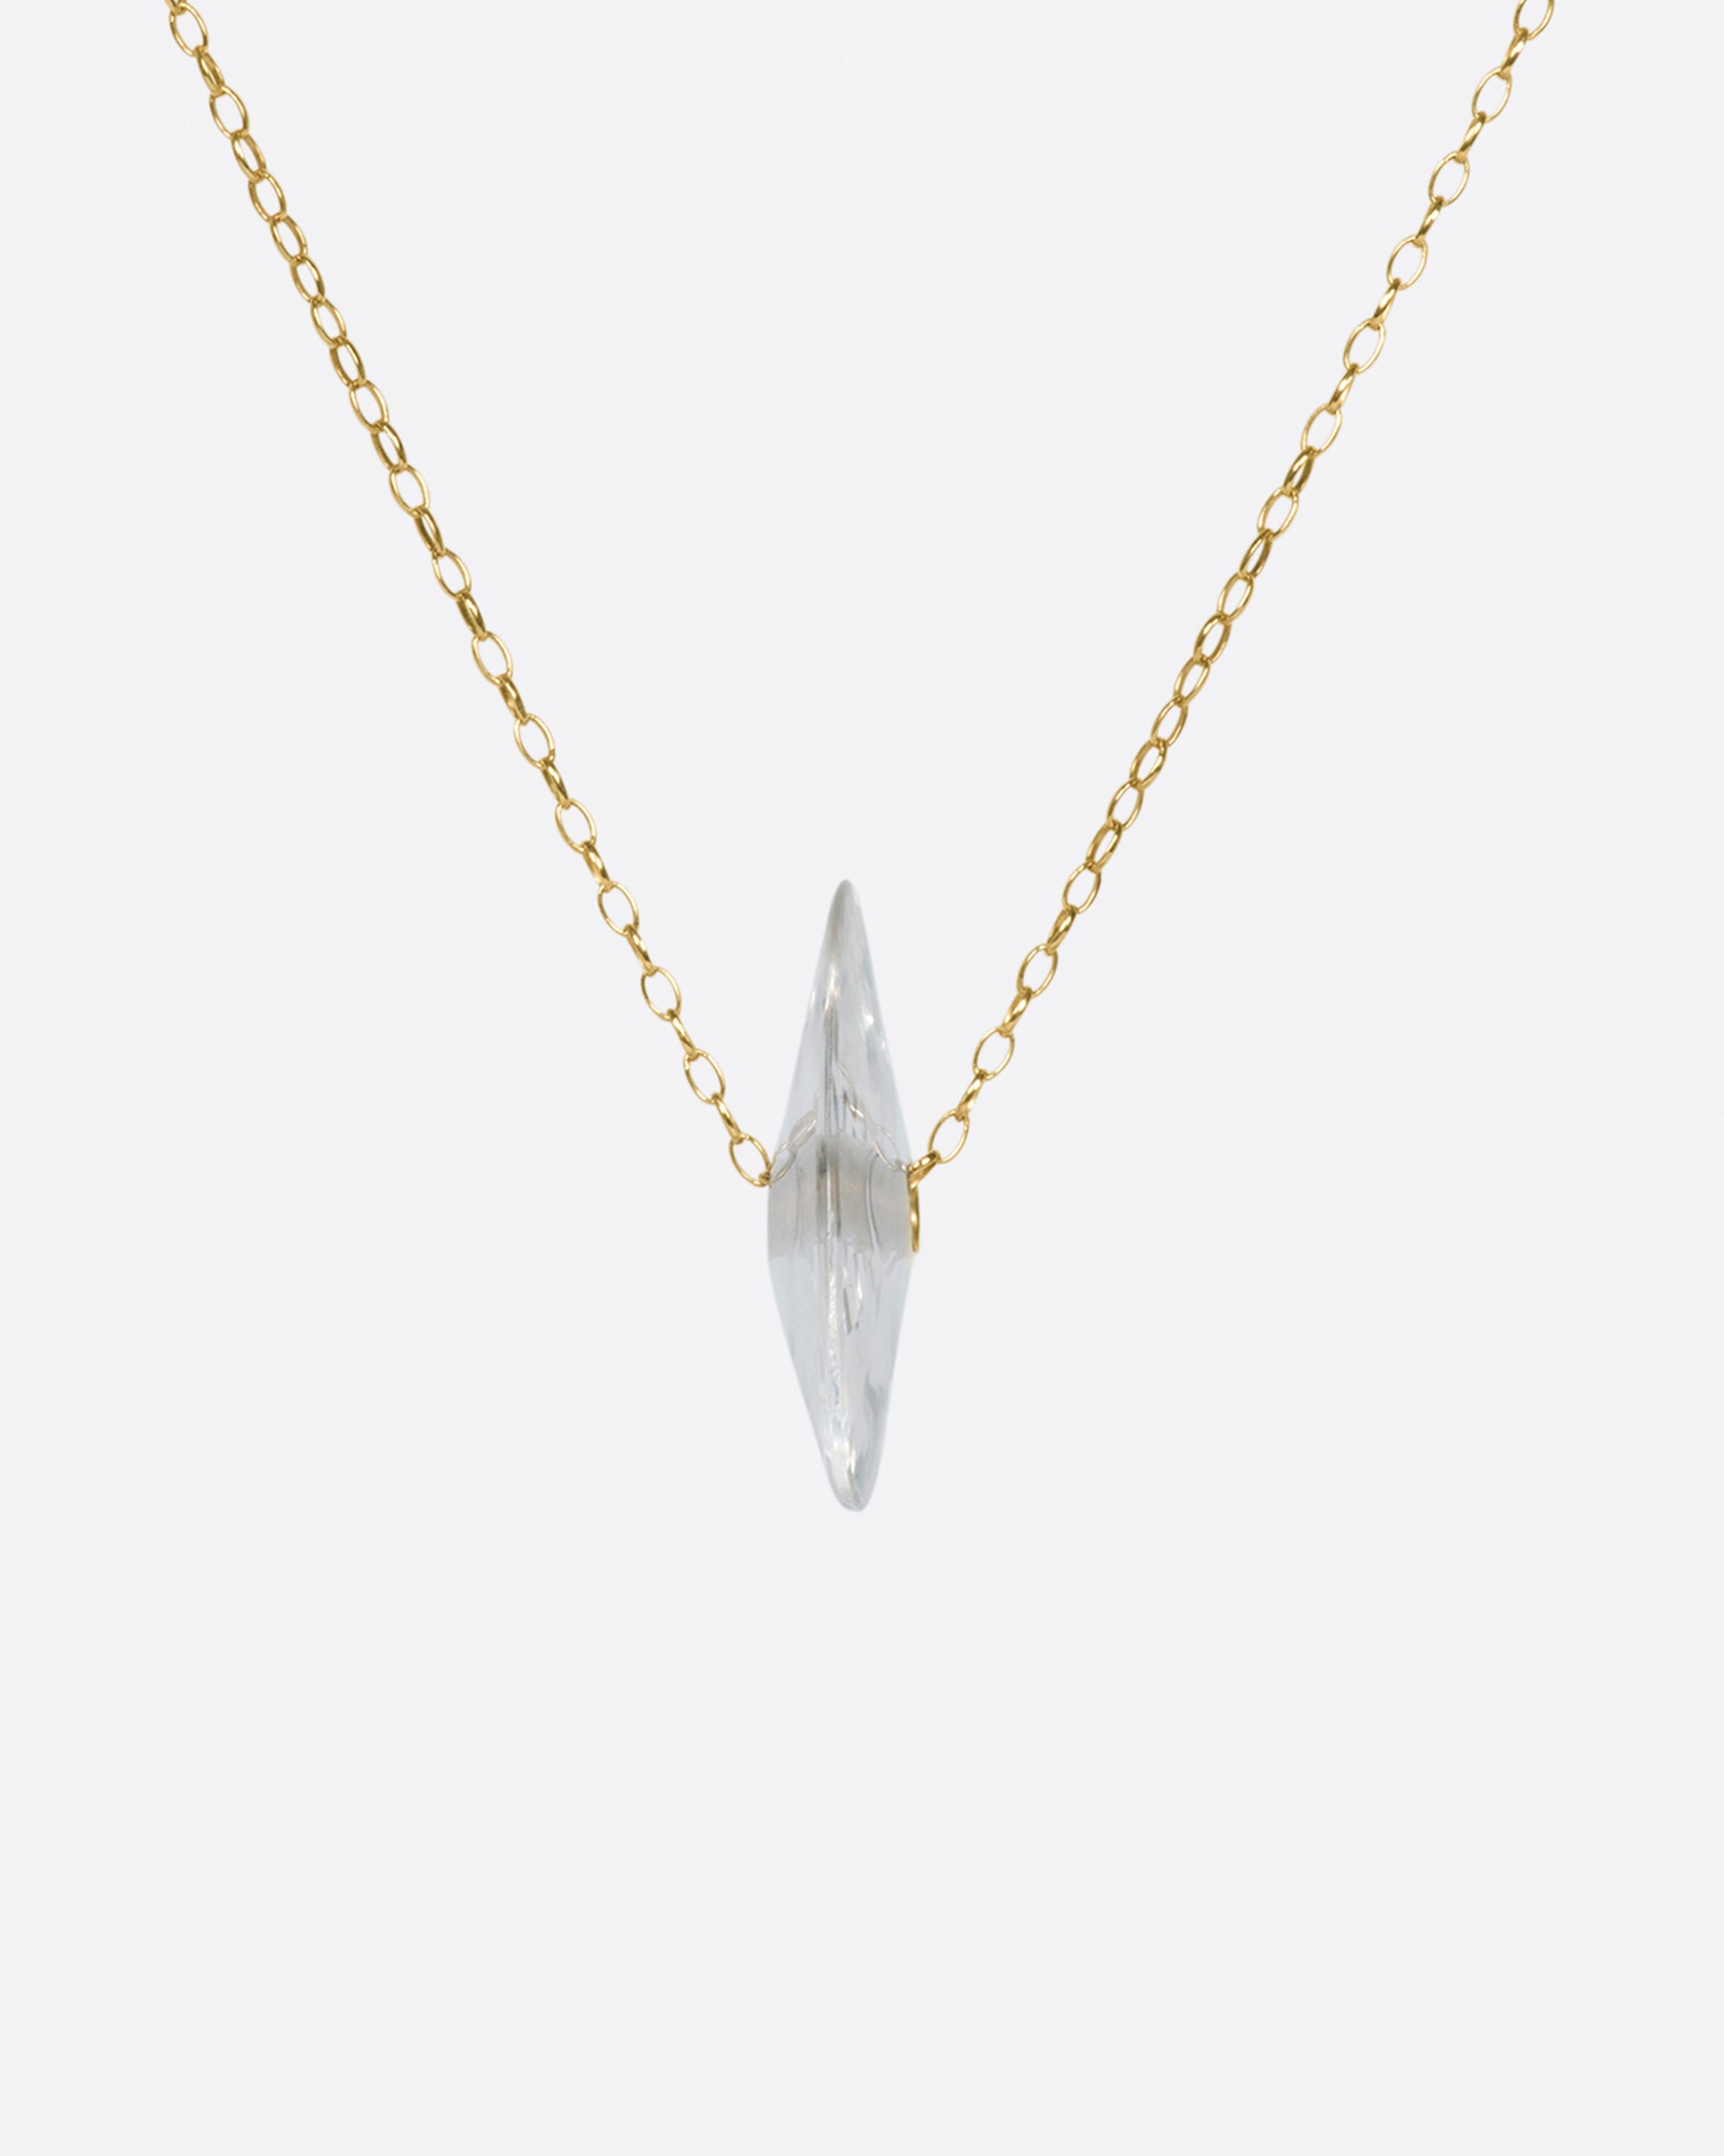 A yellow gold chain necklace with a large crystal quartz bead pendant.